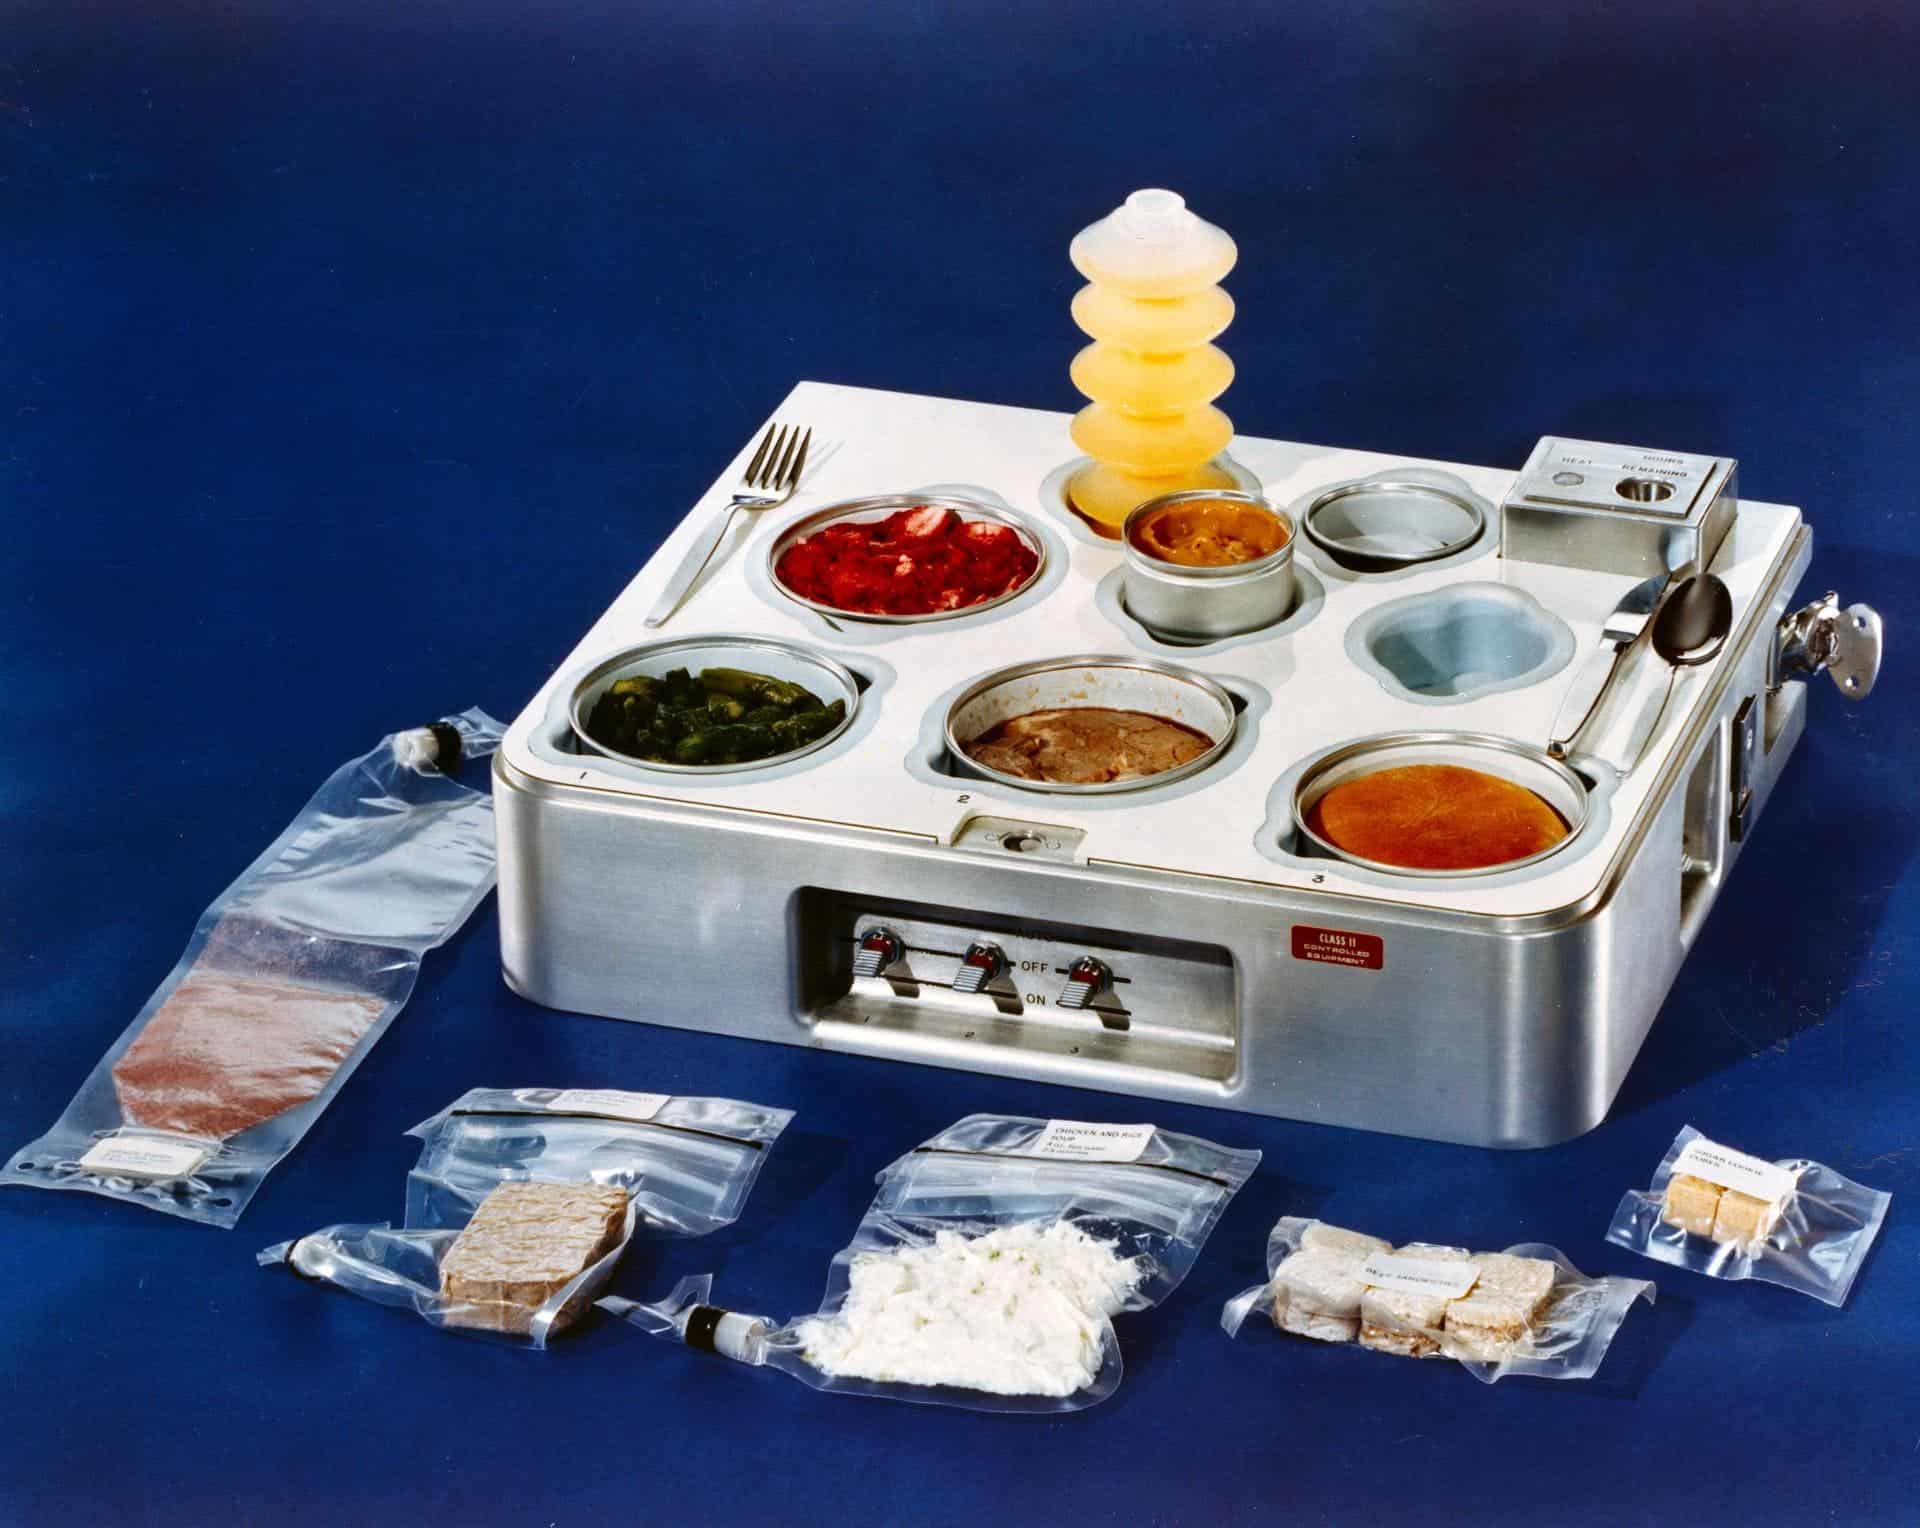 Astronaut food during the Skylab days in the 1970s: grape drink, beef pot roast, chicken and rice, beef sandwiches and sugar cookie cubes, orange drink, strawberries, asparagus, prime rib, dinner roll and butterscotch pudding. Credit: NASA.